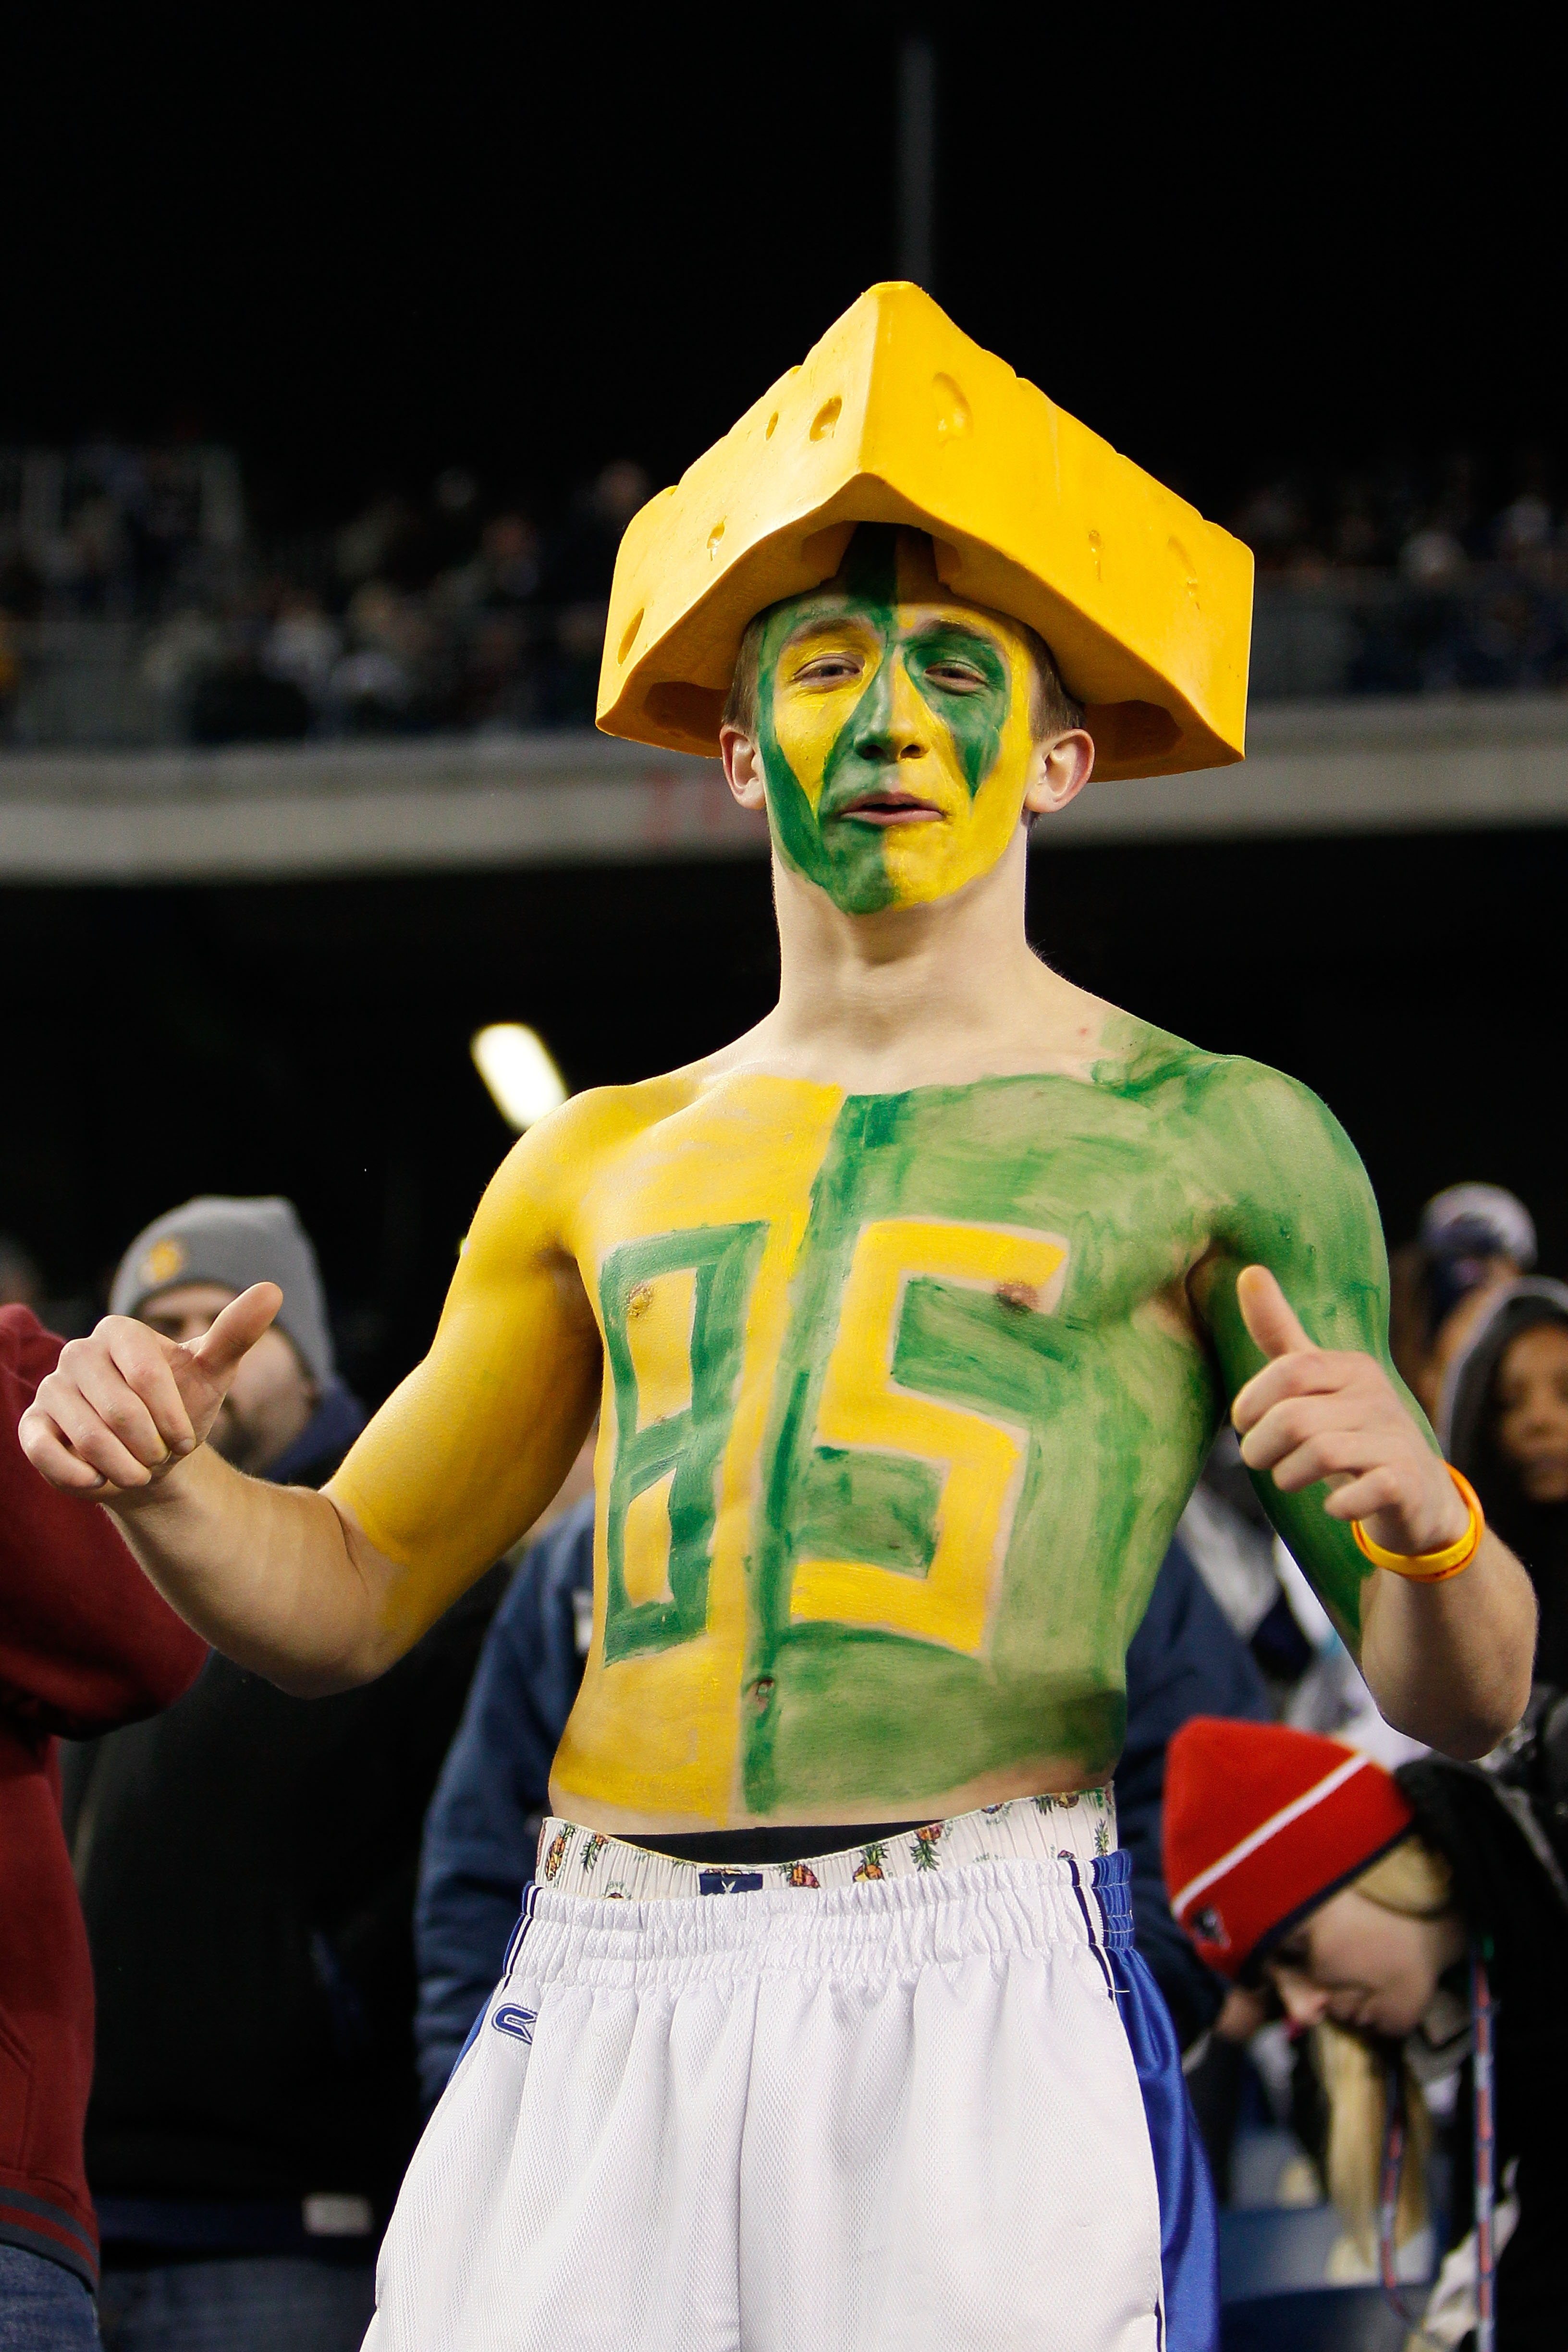 FOXBORO, MA - DECEMBER 19:  A fan of the Green Bay Packers cheers for the team prior to the start of the game against New England Patriots at Gillette Stadium on December 19, 2010 in Foxboro, Massachusetts.  (Photo by Jim Rogash/Getty Images)